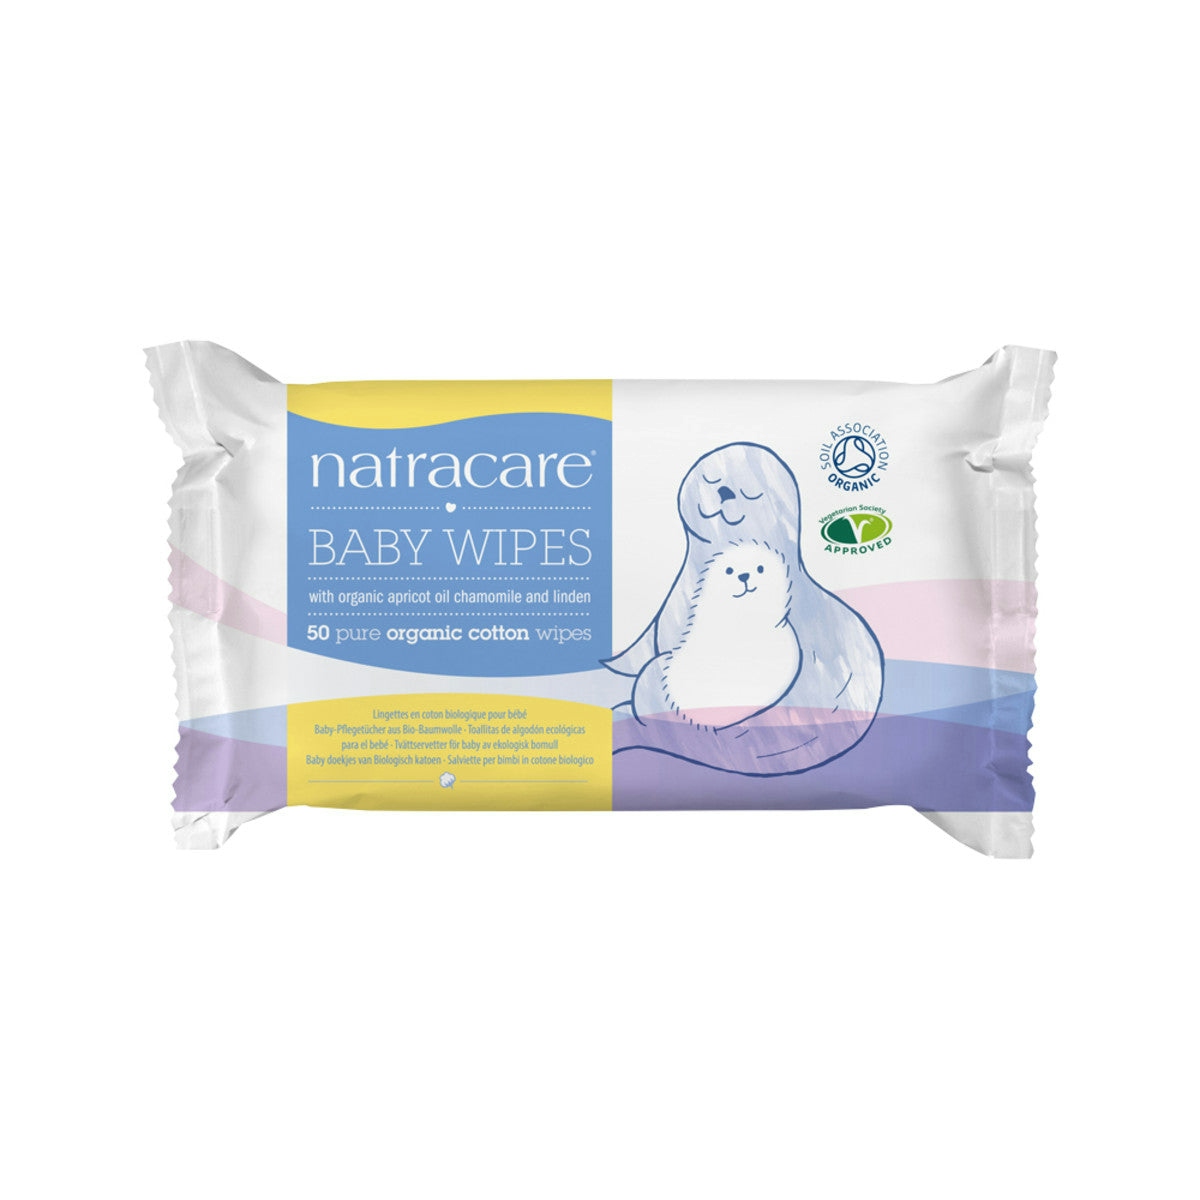 image of Natracare Organic Cotton Baby Wipes with Organic Apricot Oil, Chamomile & Linden x 50 Pack on white background 